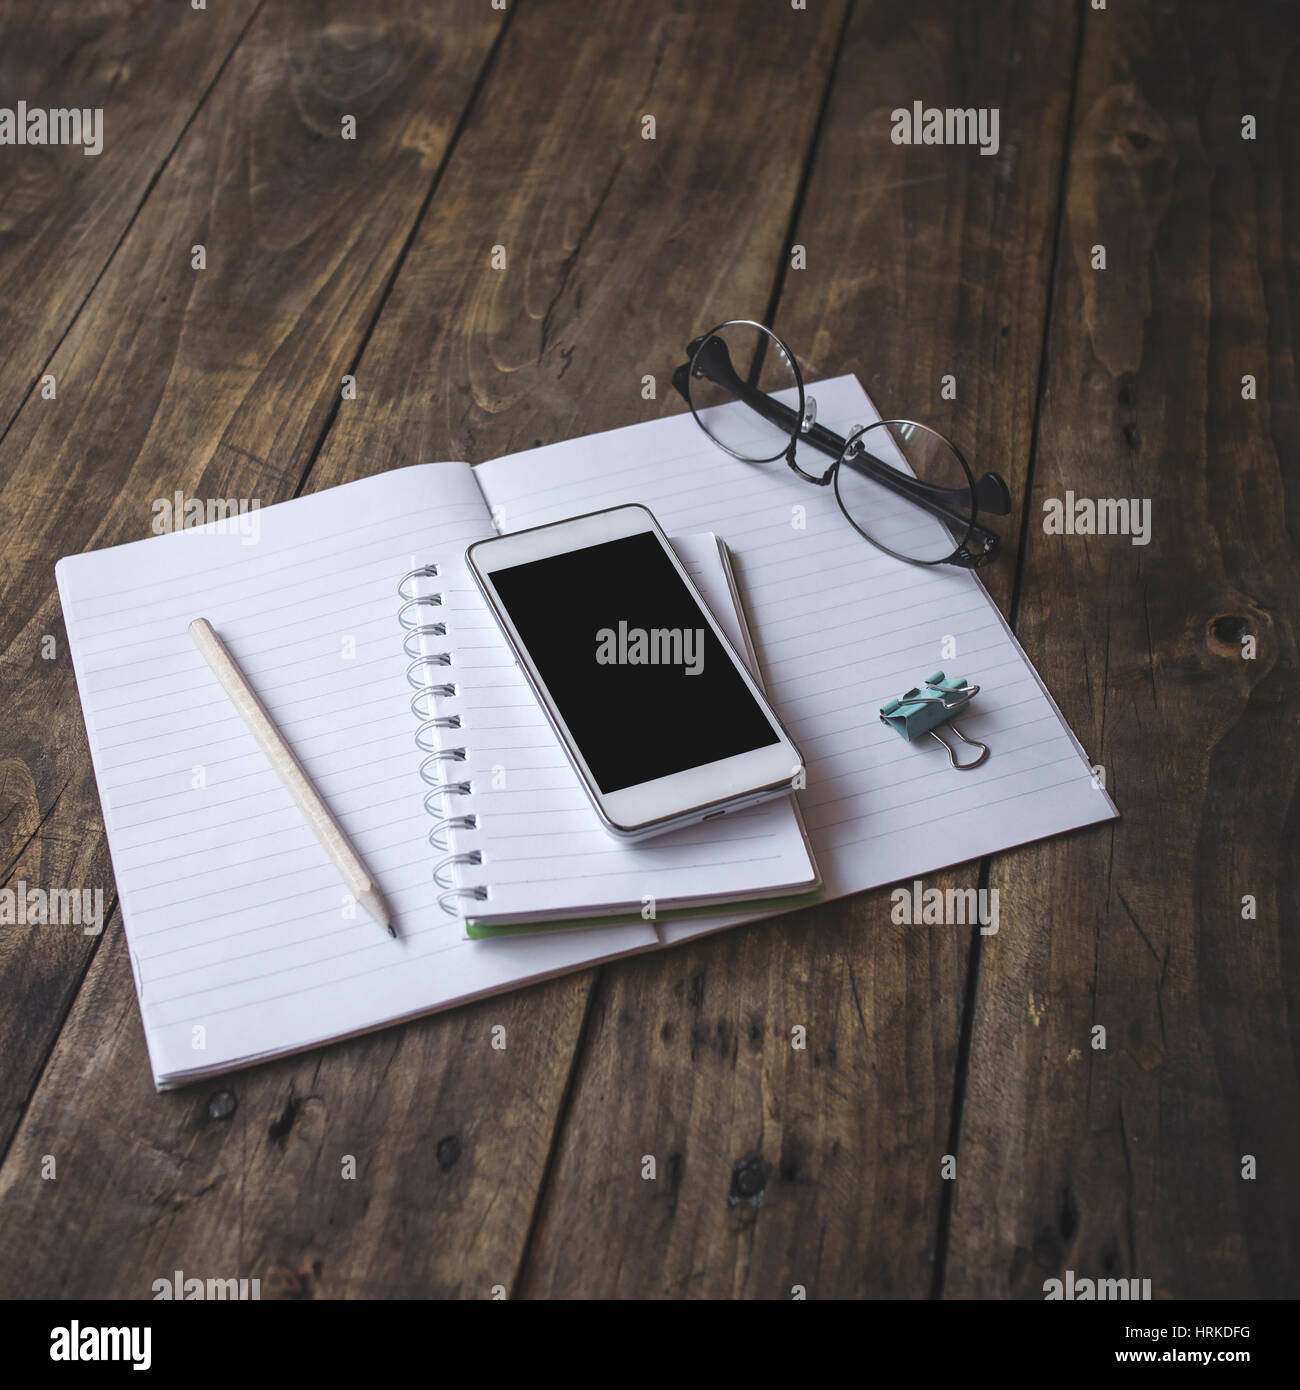 Home office tabletop: papers and notebooks, reading glasses, smart phone, pen on an old wooden board background. Vintage lifestyle. Stock Photo